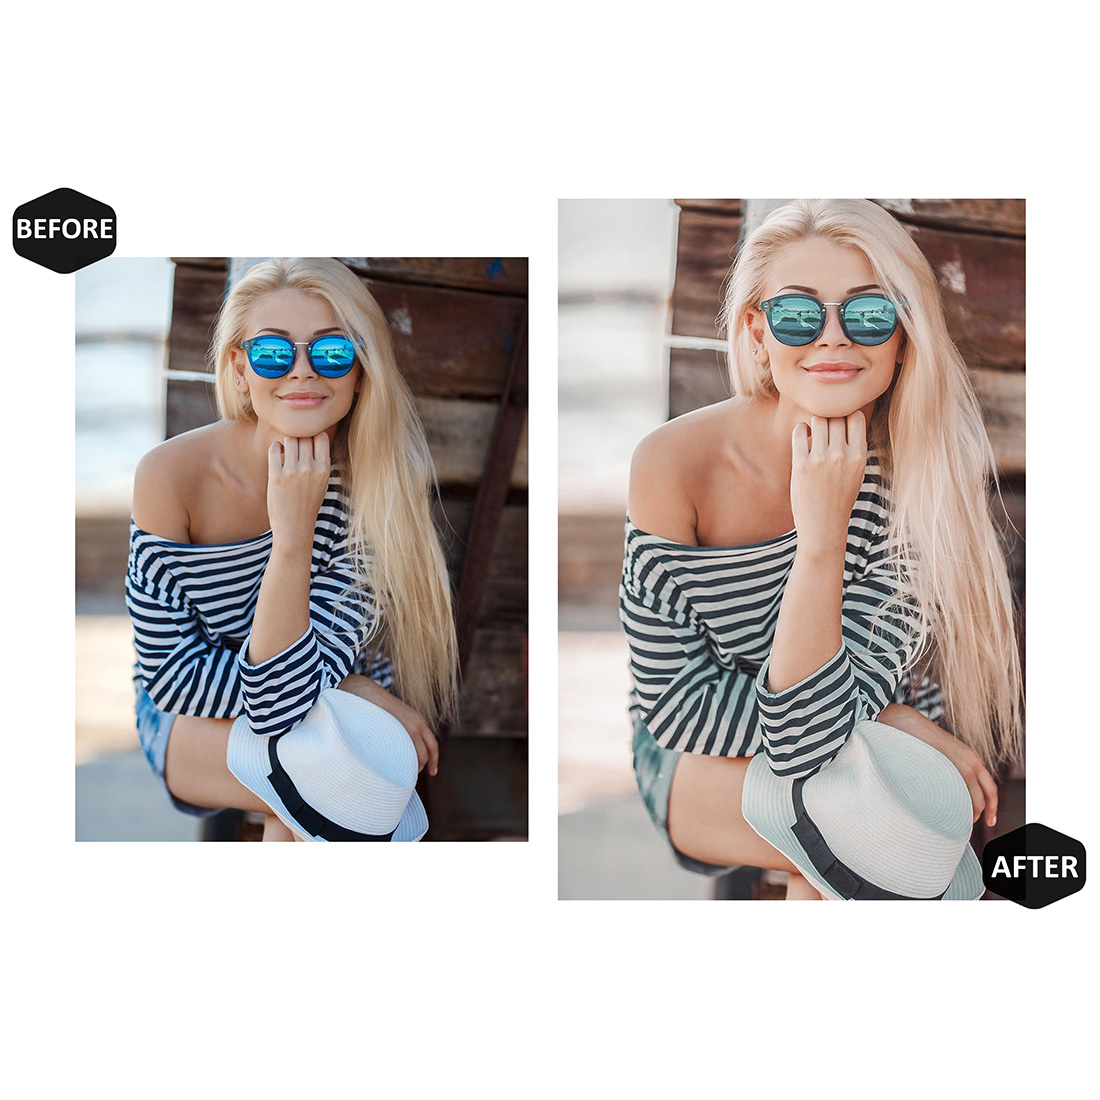 12 Photoshop Actions, Summer Punch Ps Action, Orange Skin ACR Preset, Bright Ps Filter, Atn Portrait And Lifestyle Theme For Instagram, Blogger preview image.